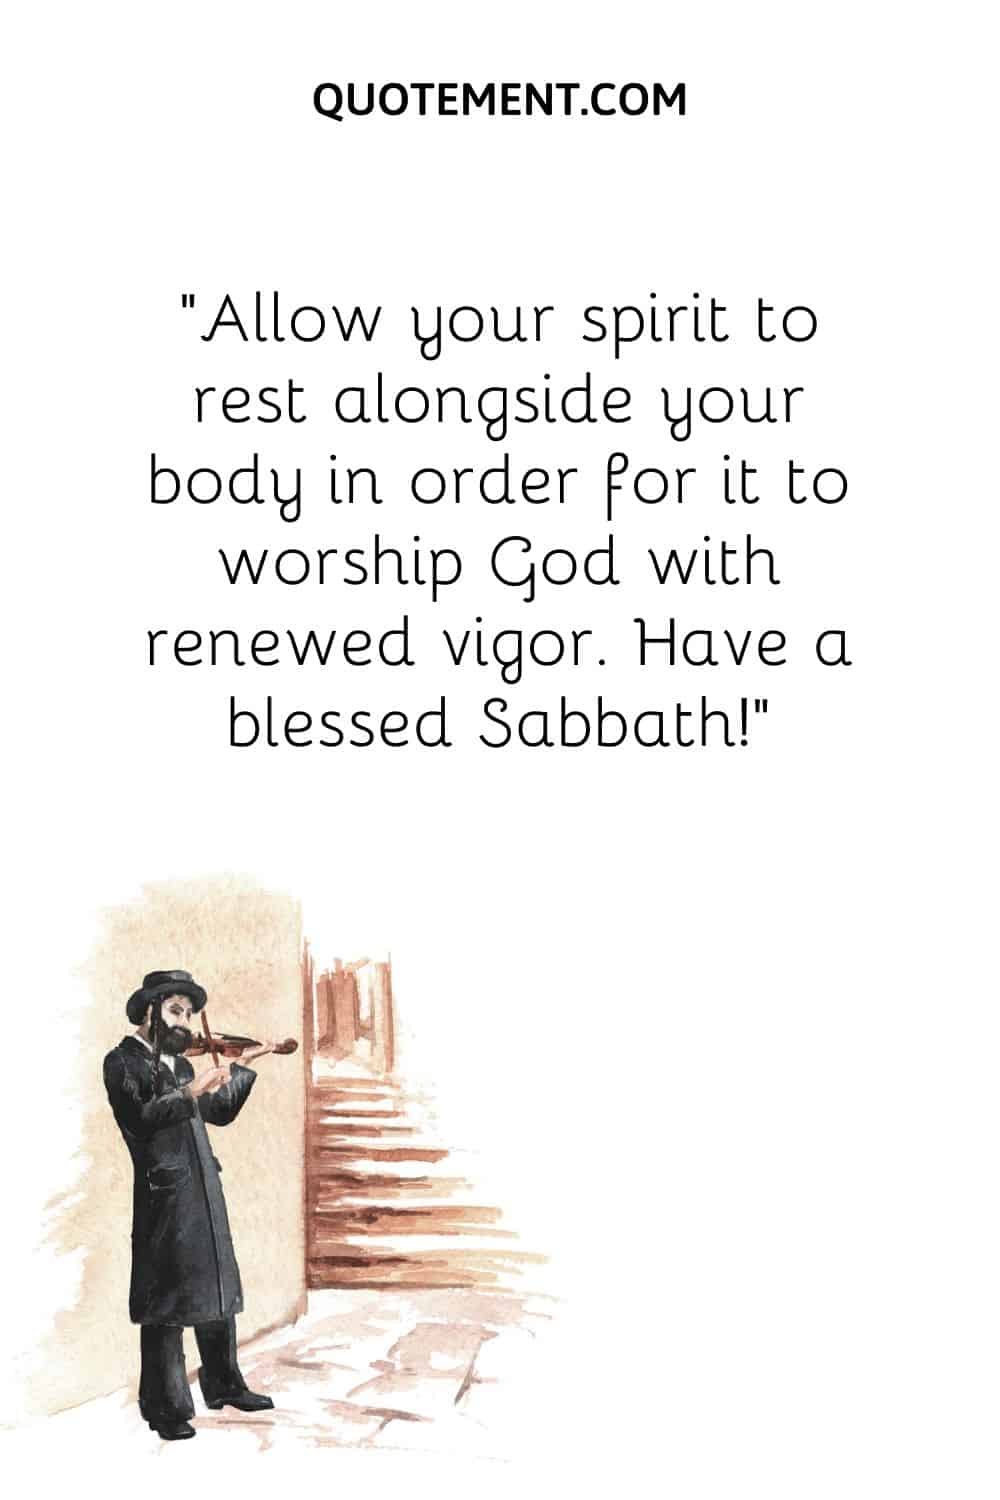 Allow your spirit to rest alongside your body in order for it to worship God with renewed vigor